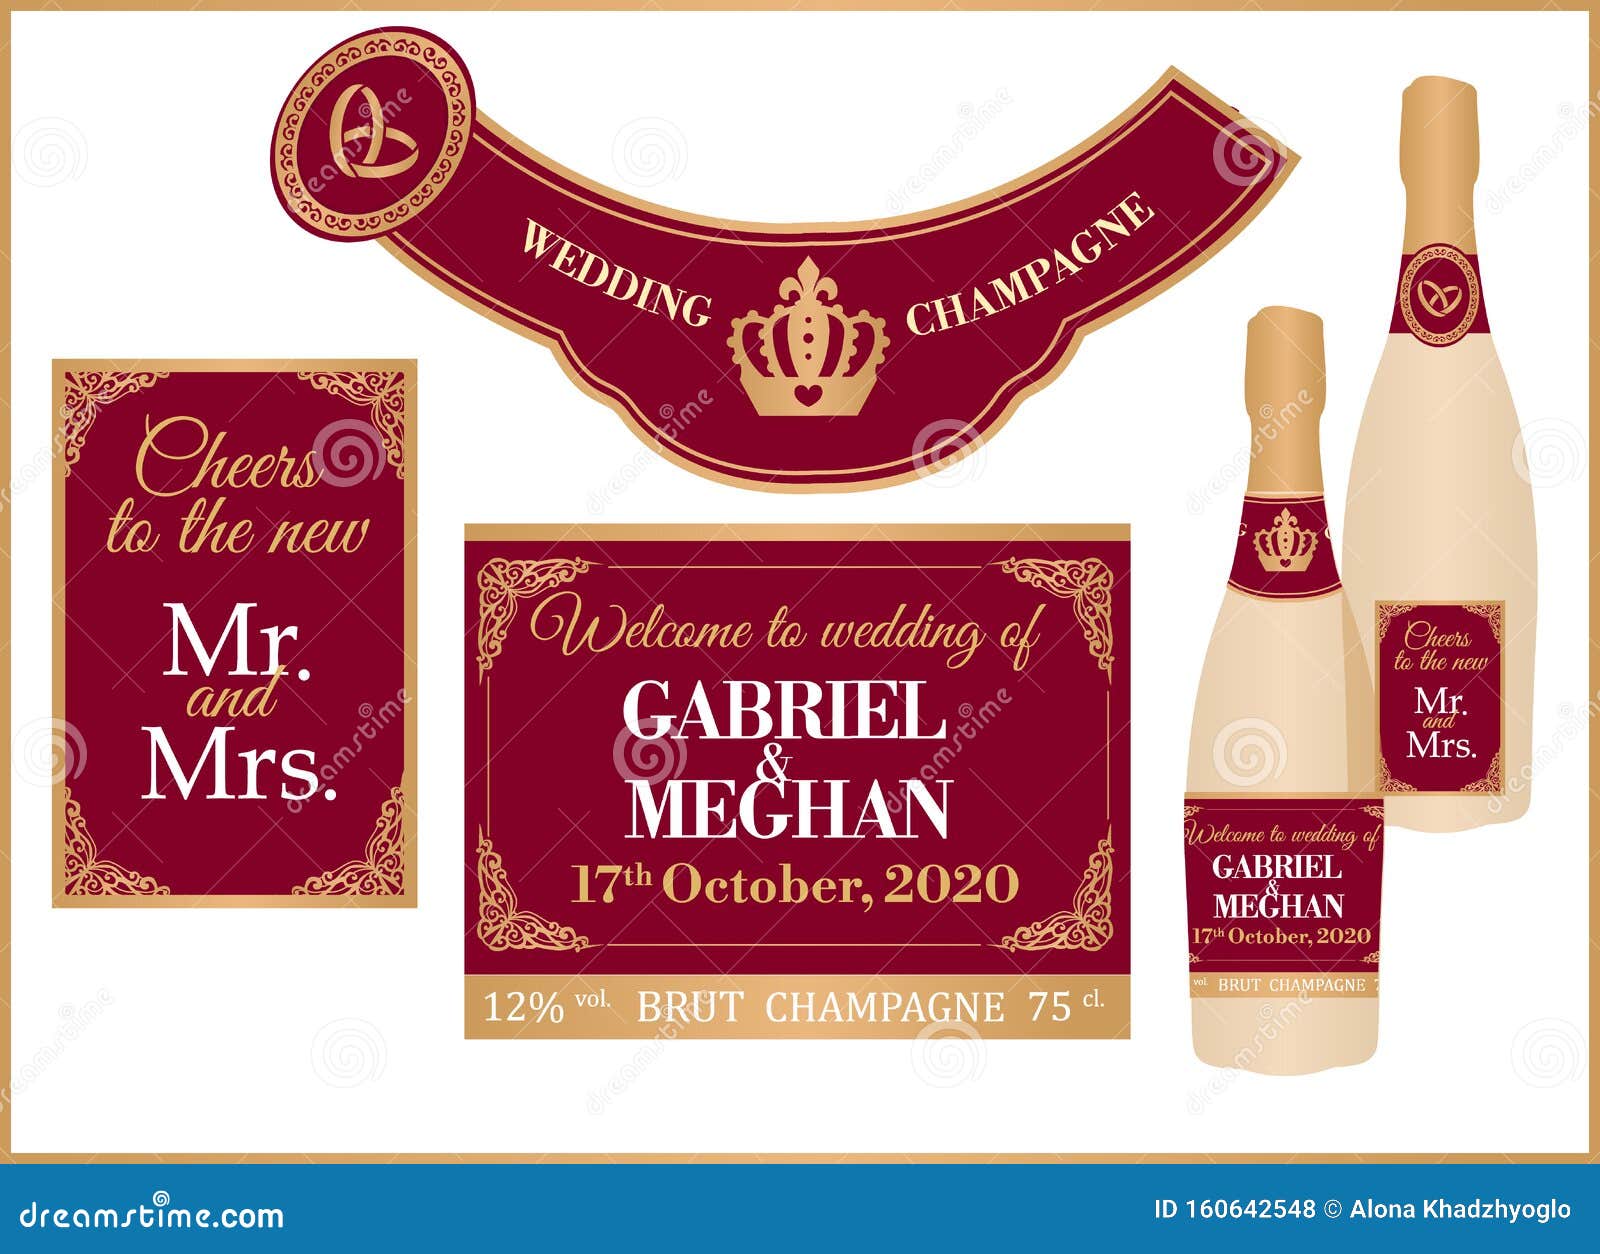 Champagne Bottle Label Template from thumbs.dreamstime.com